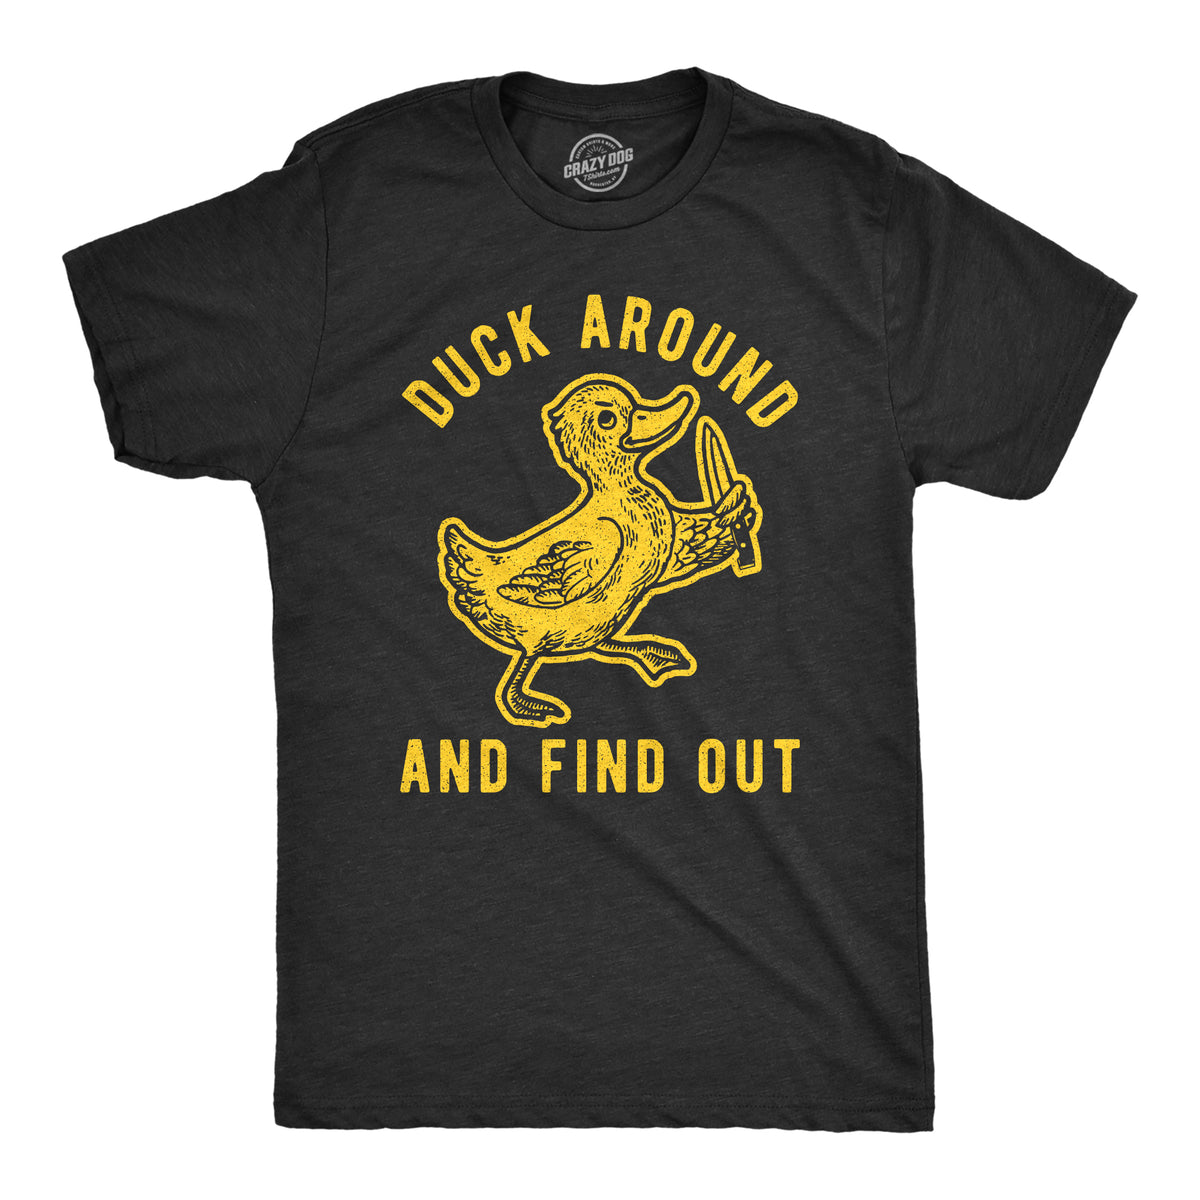 Funny Heather Black - Duck Around Duck Around And Find Out Mens T Shirt Nerdy Animal Tee